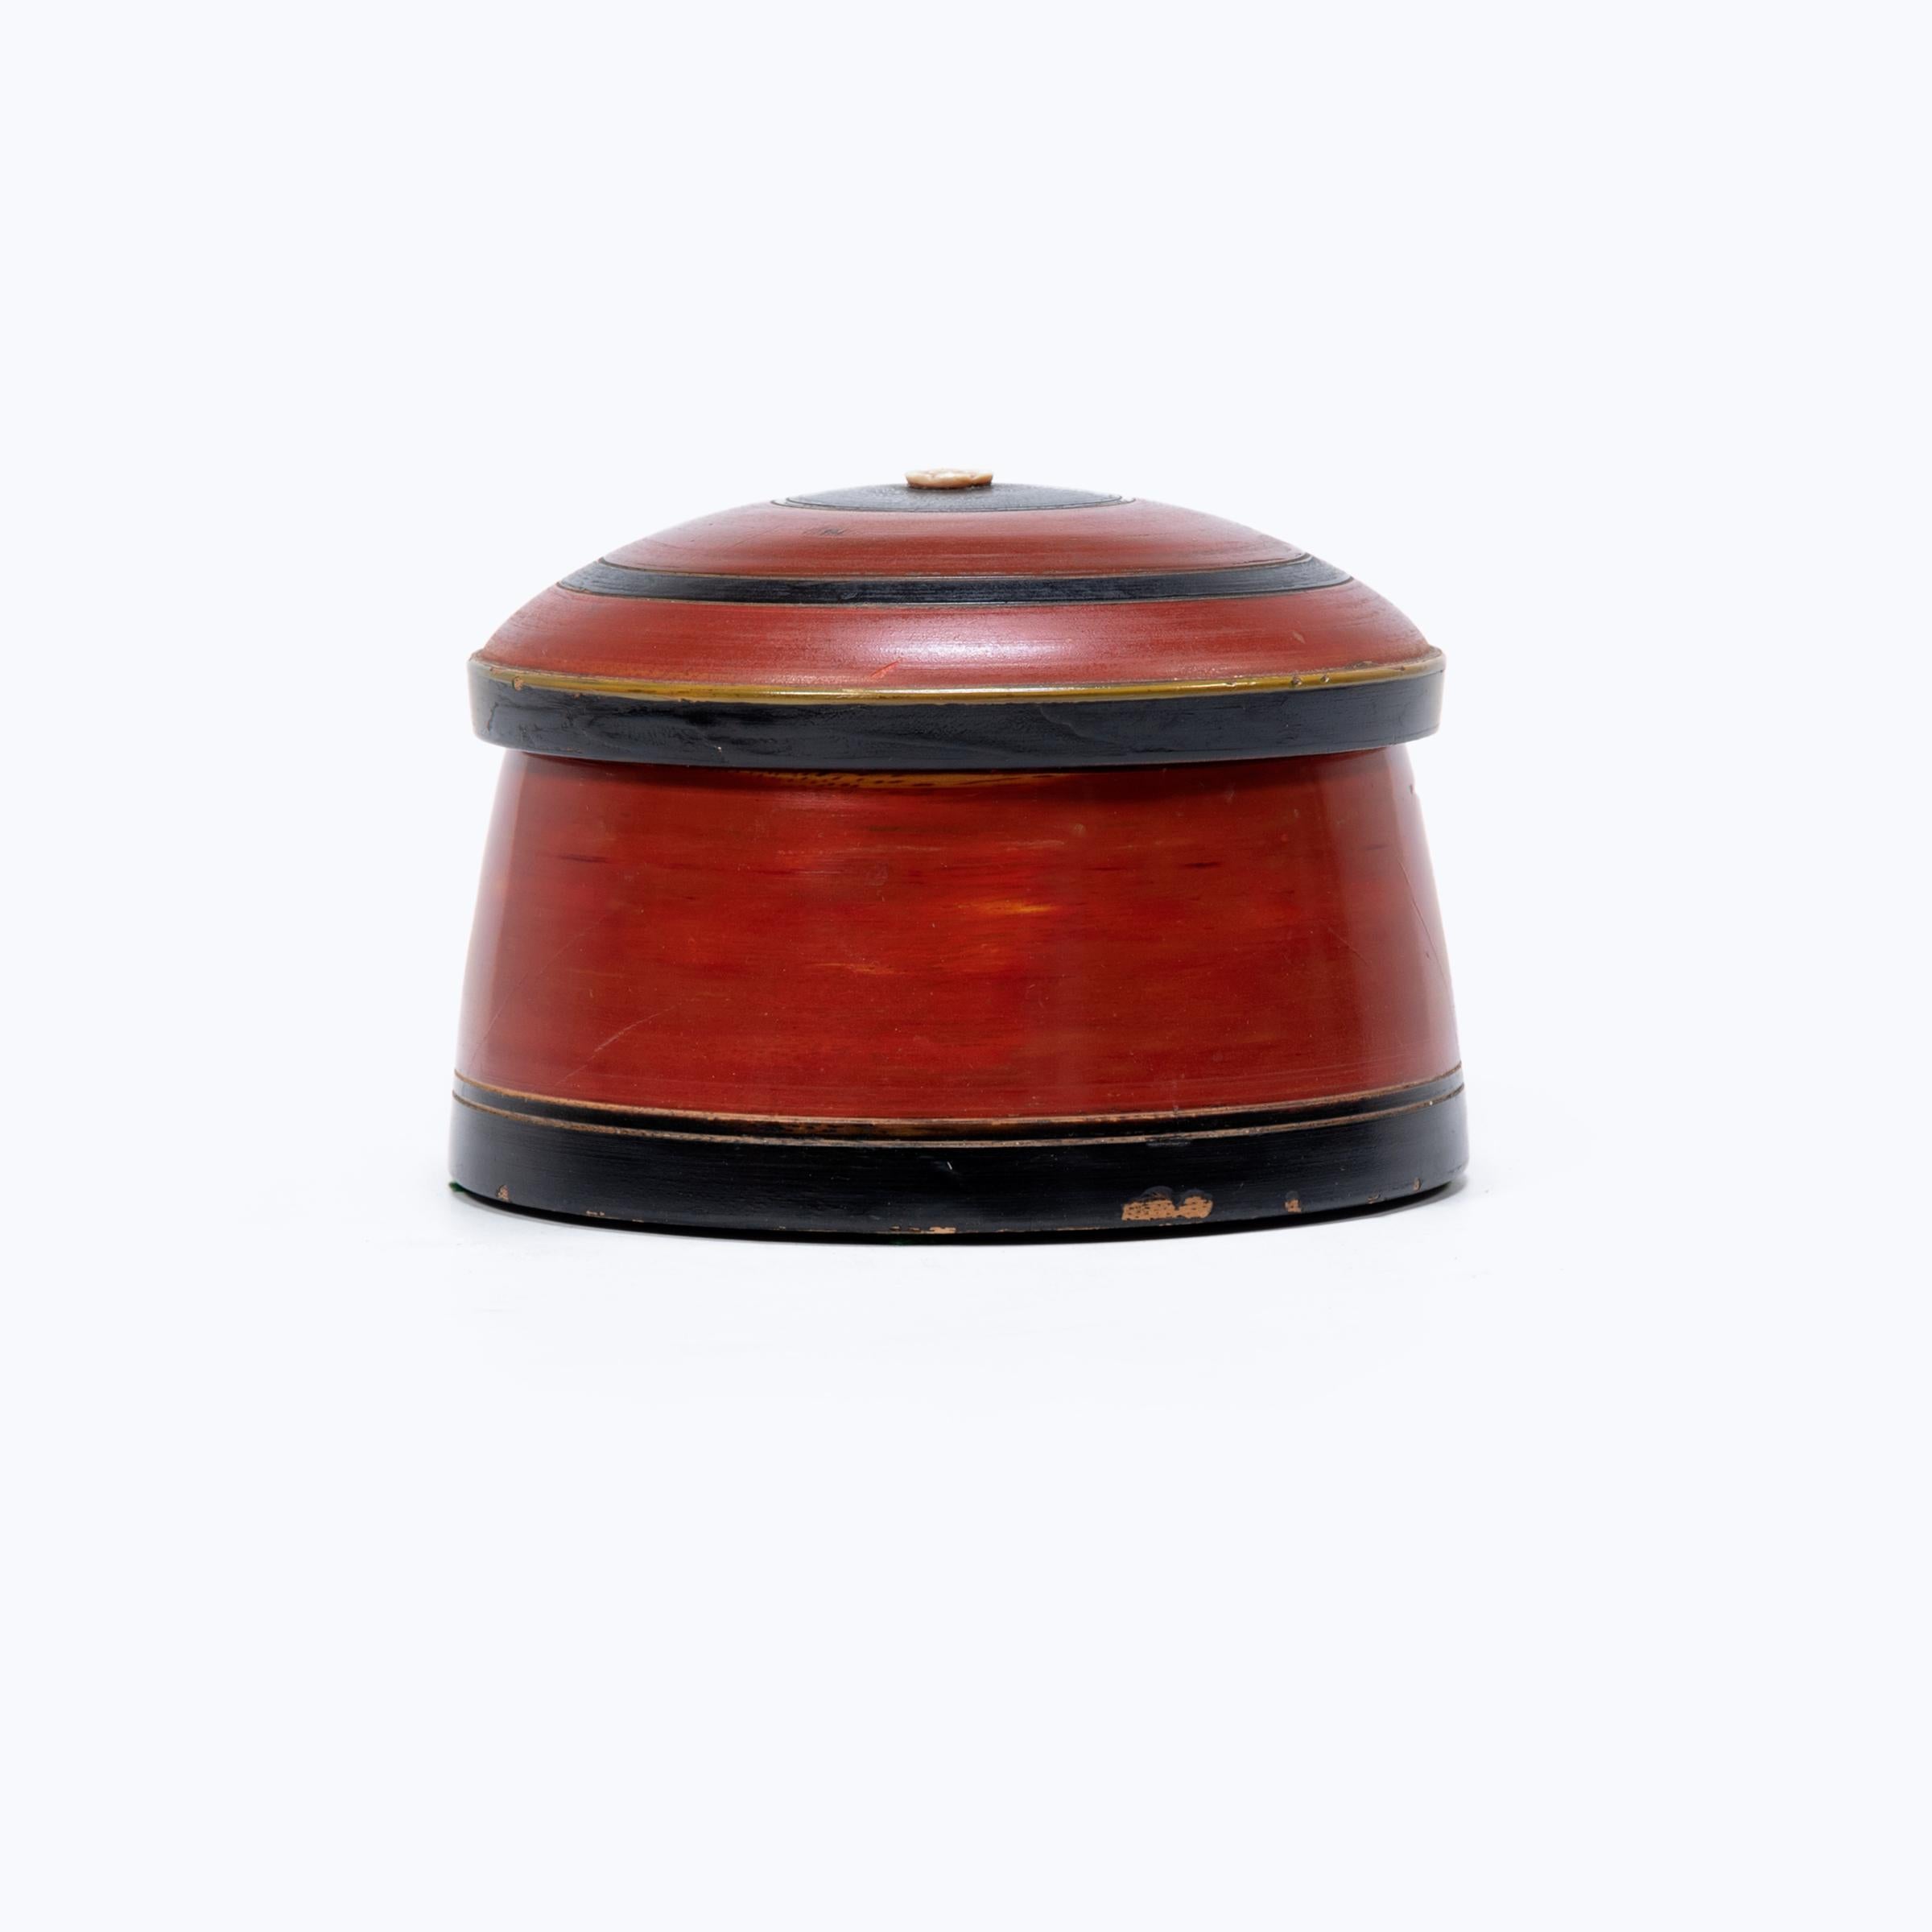 In many southeast Asian cultures, offering guests a betel quid to chew was the fundamental symbol of hospitality. A blend of leaves, nuts, seasonings, and sometimes tobacco, betel was kept in finely worked and decorated boxes. These round betel